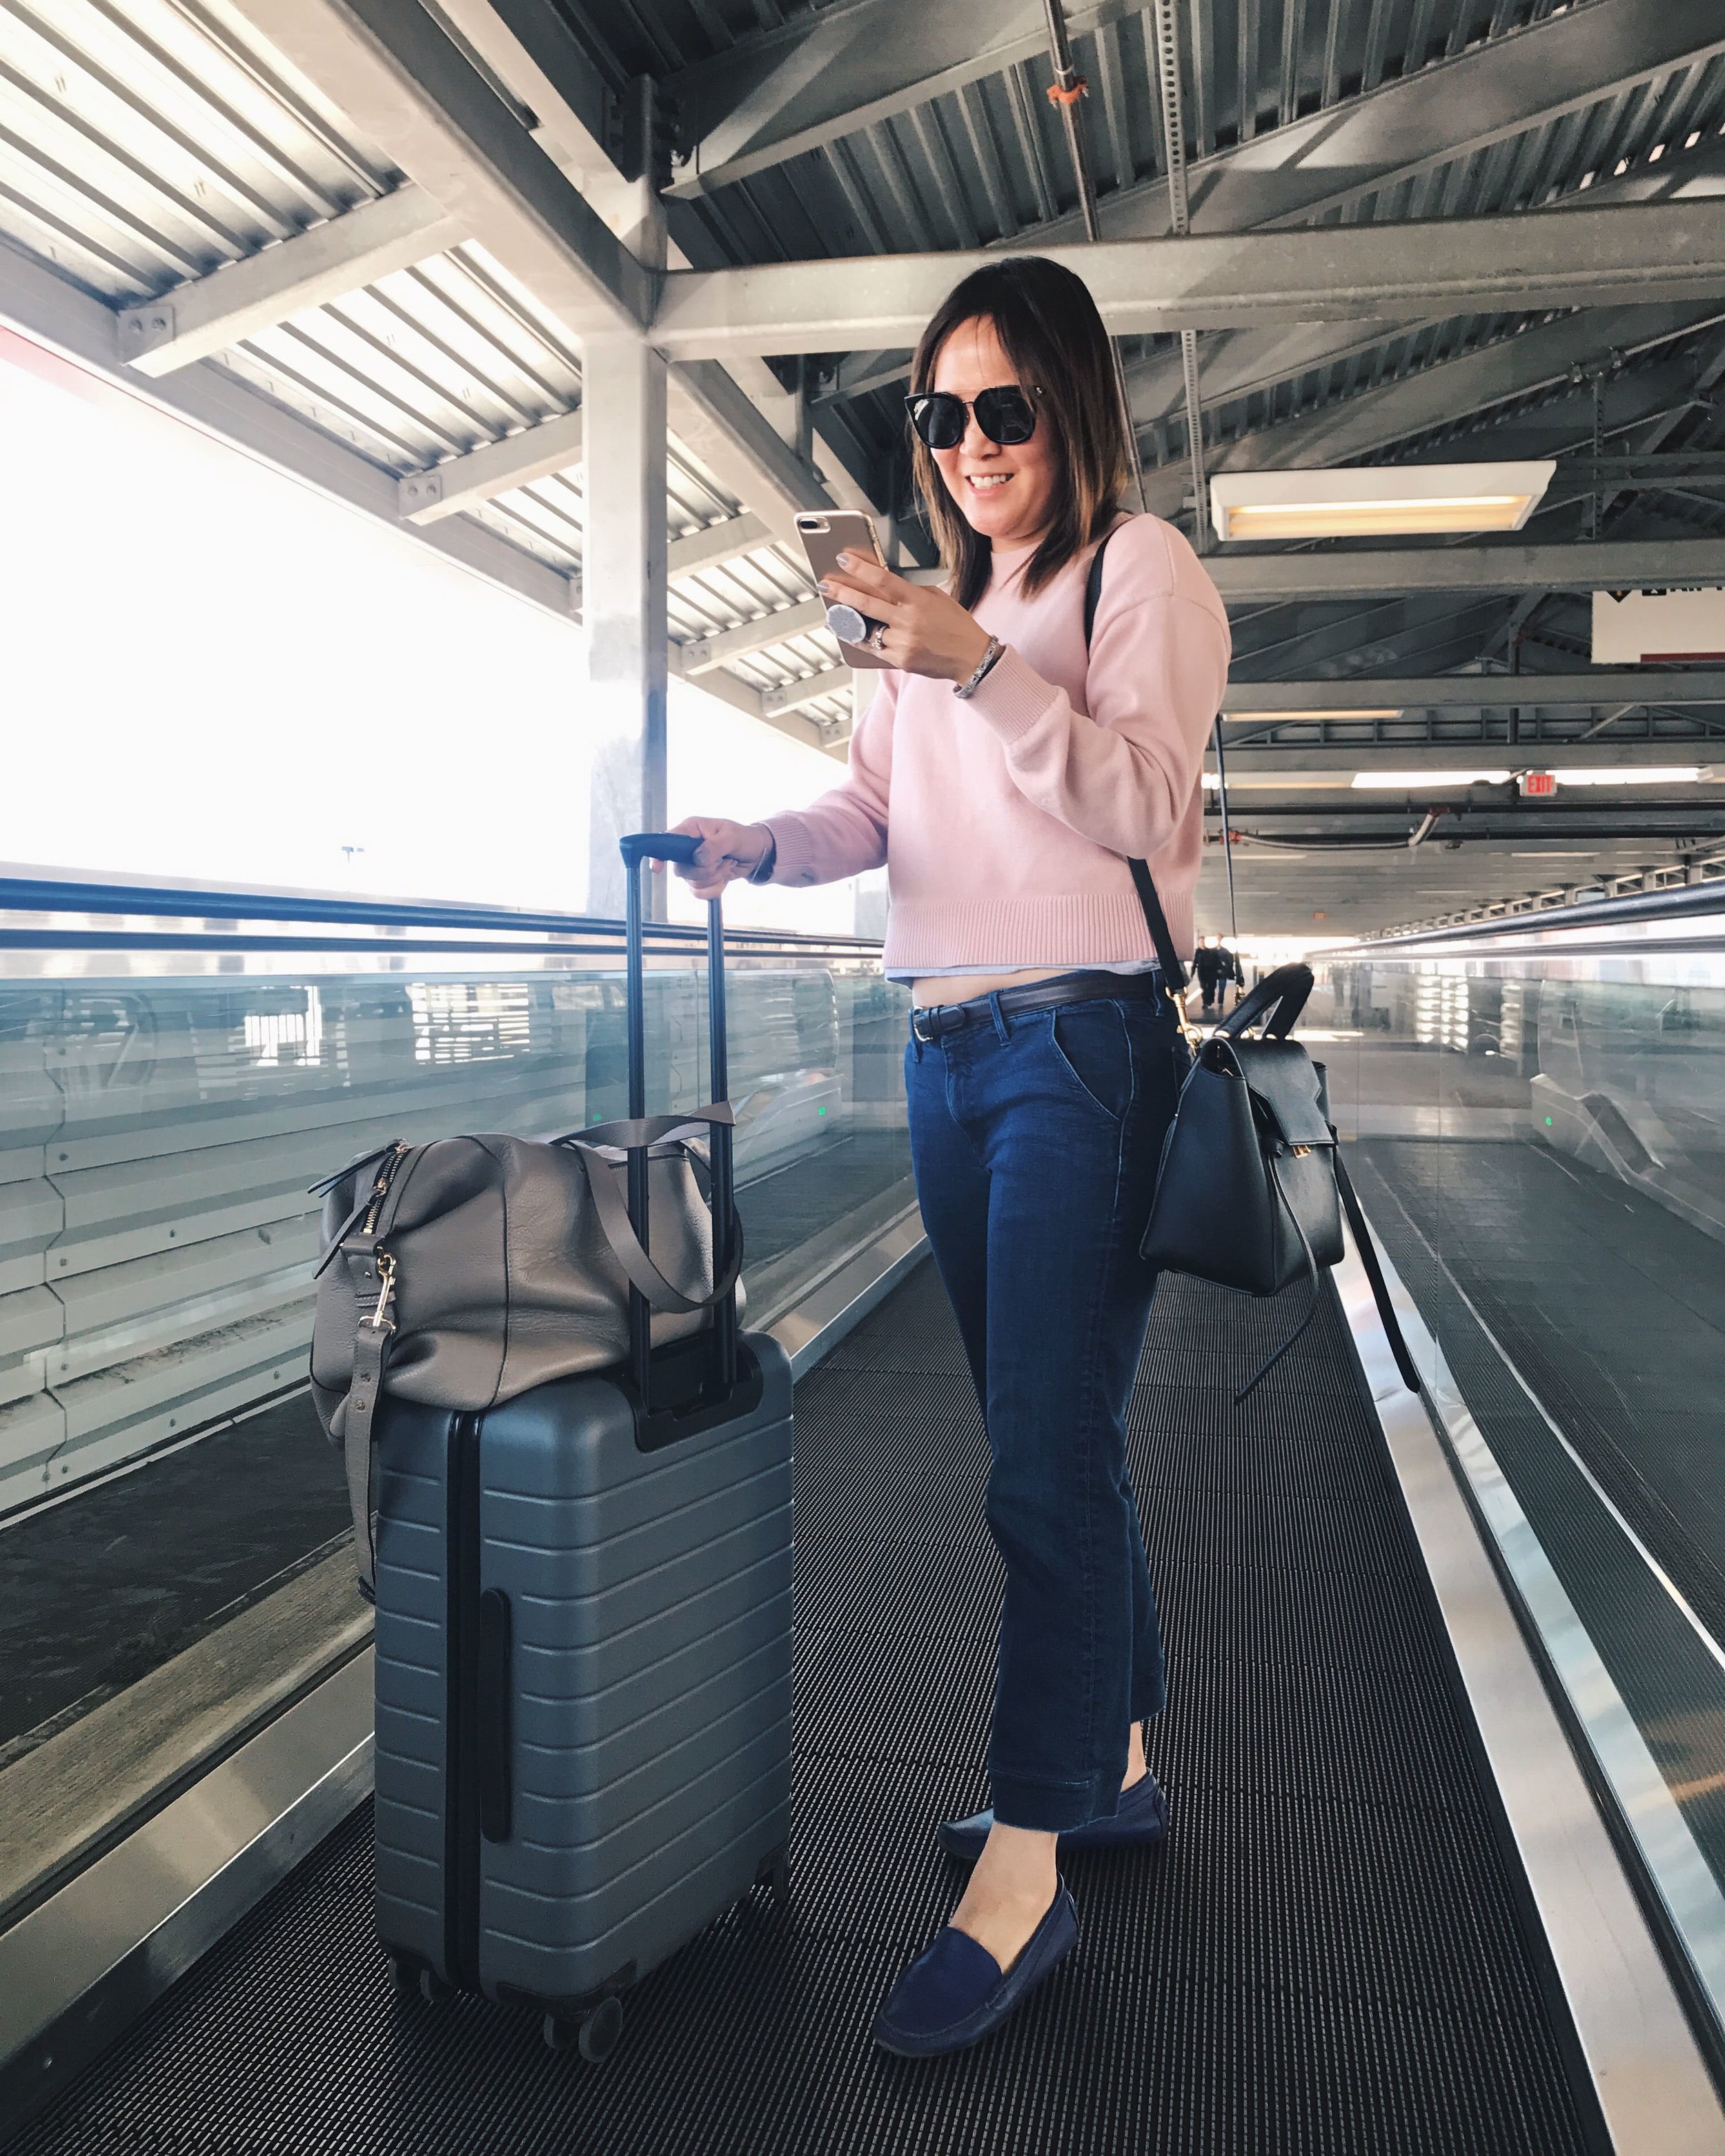 Away Luggage Review - The Bigger Carry-On Suitcase {Updated February 2021}  — Fairly Curated